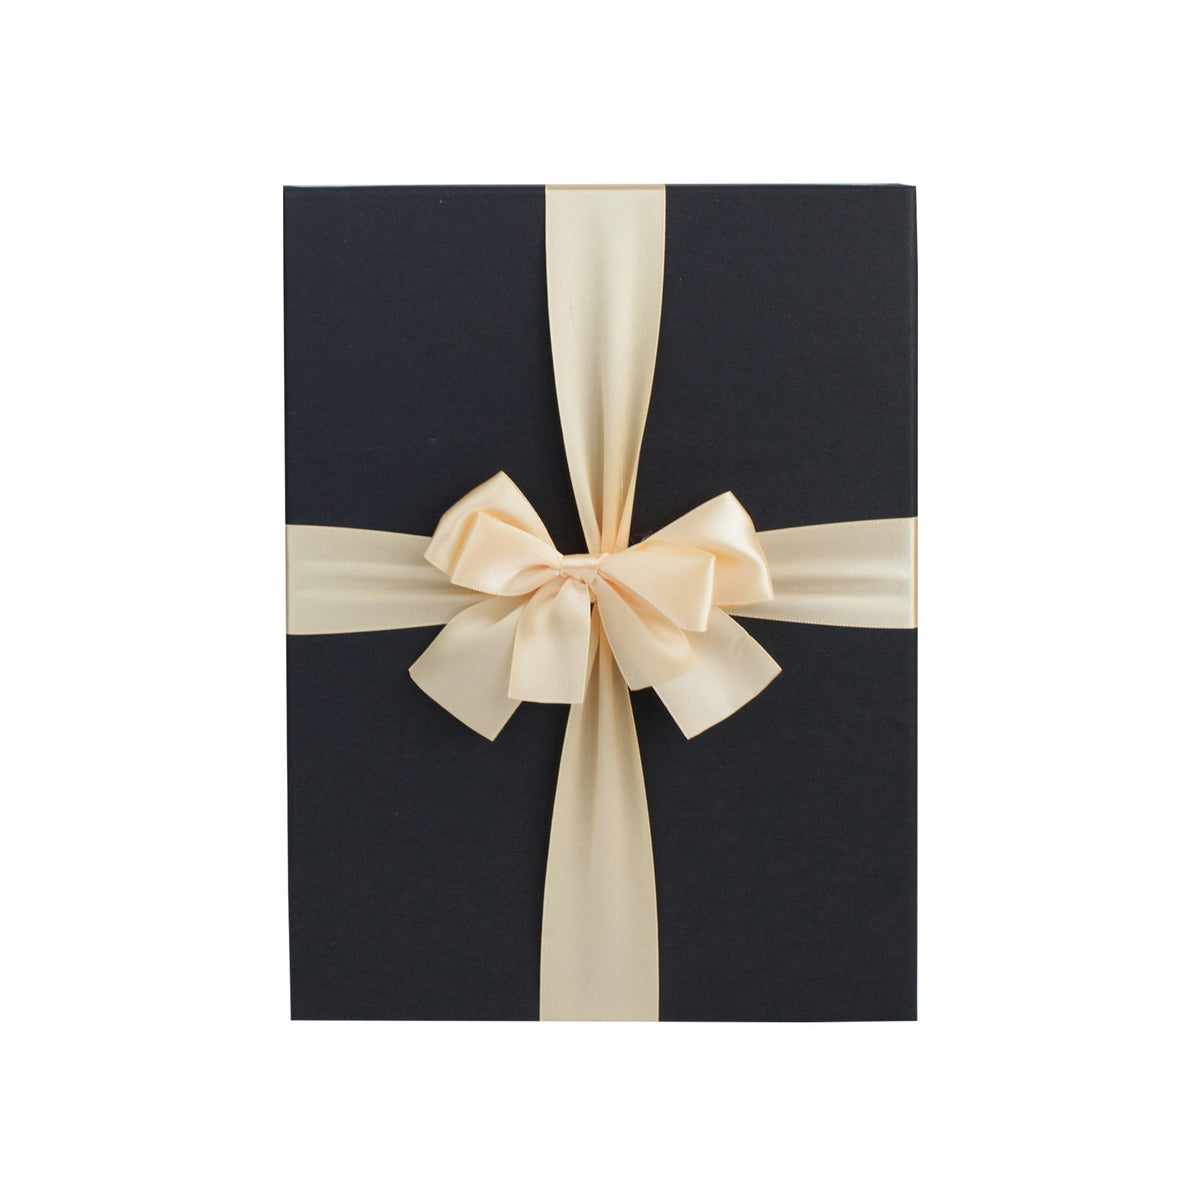 Emartbuy luxury gift boxes with contrasting interior